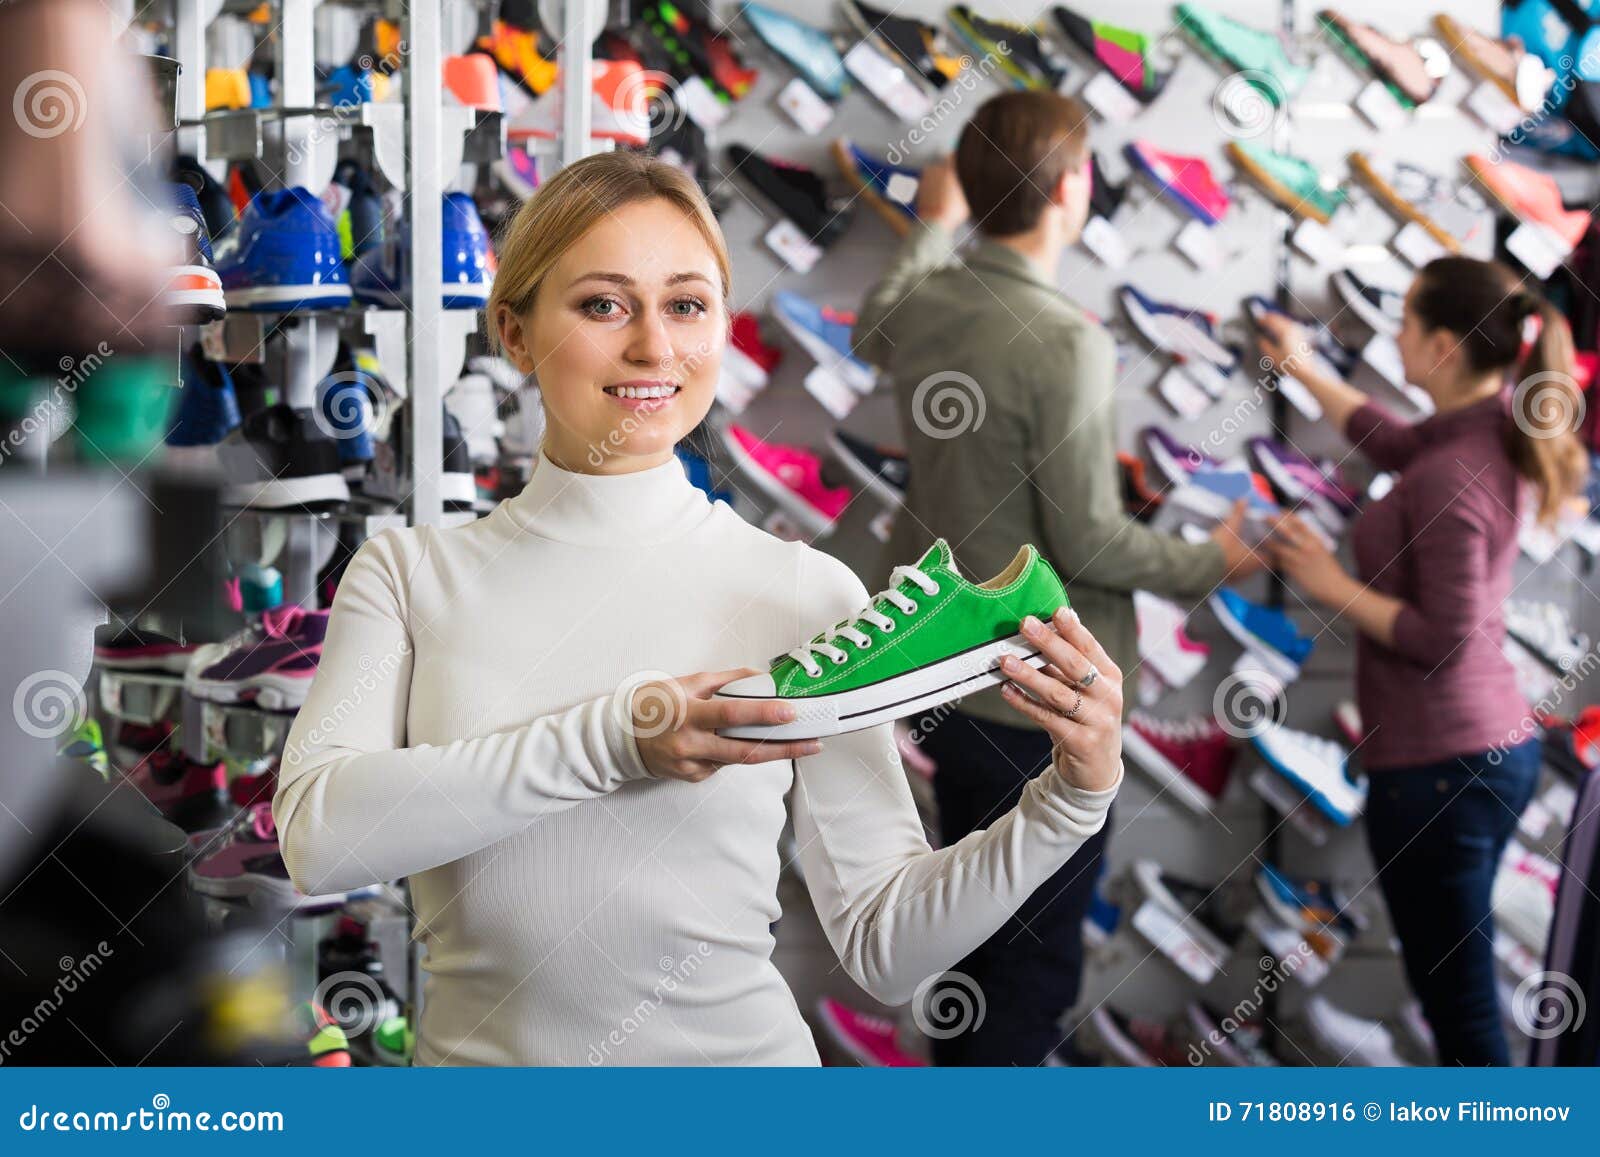 Girl Choosing Shoes in Store Stock Photo - Image of casual, sale: 71808916